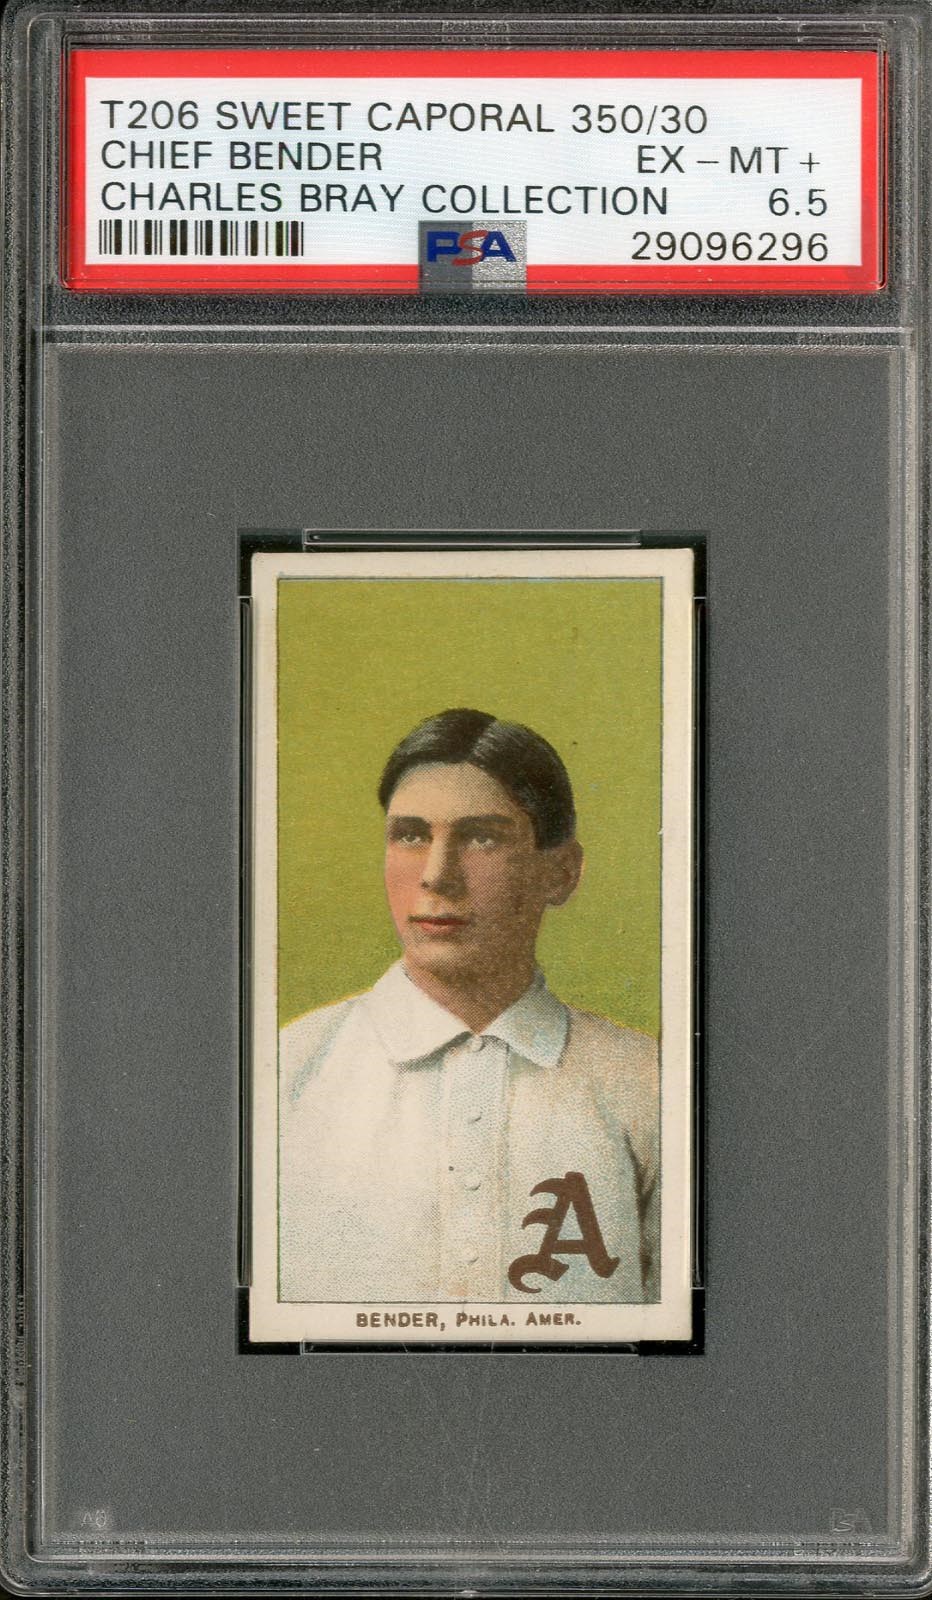 - T206 Sweet Caporal 350/30 Chief Bender PSA 6.5 From The Charles Bray Collection